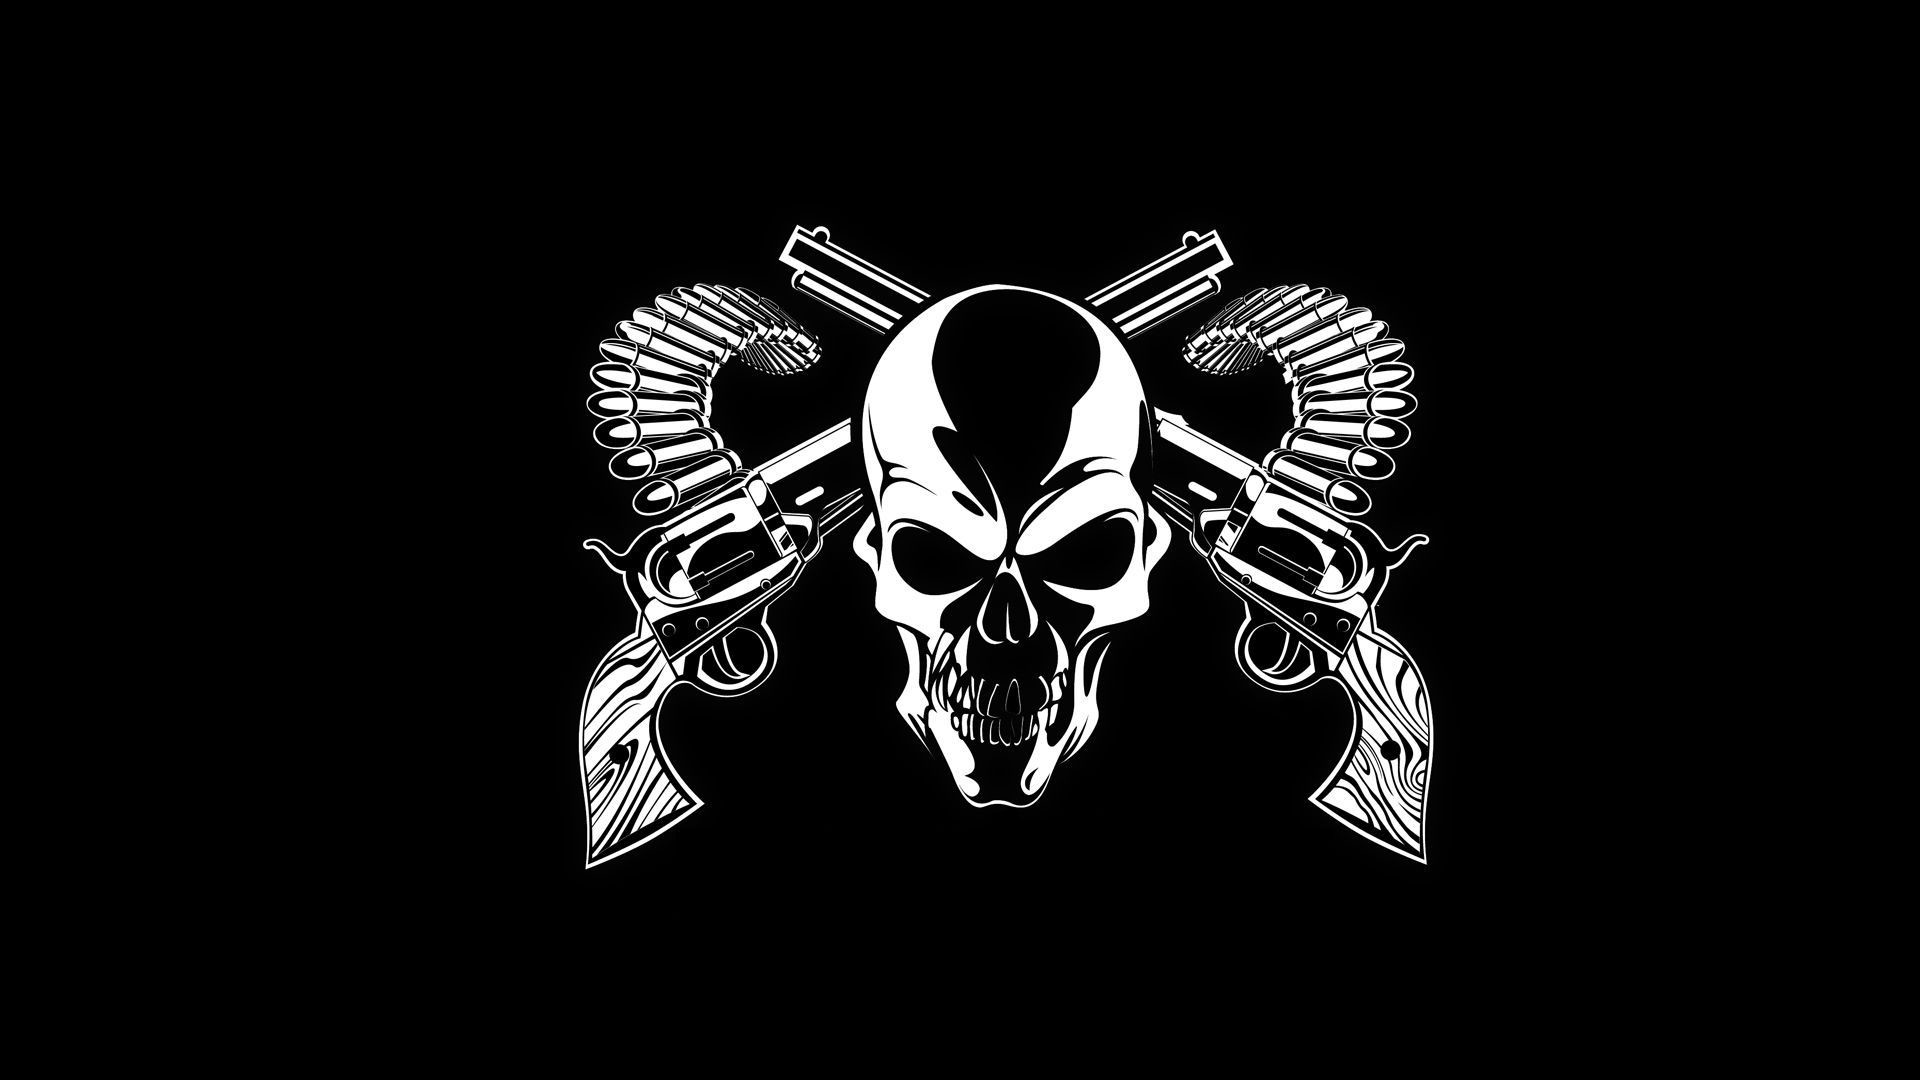 1920x1080 Skull Wallpapers Free Download - HD Wallpapers , Picture ,Background  ,Photos ,Image - Free HQ Wallpaper - HD Wallpaper PC | Pinterest | Skull  wallpaper, ...